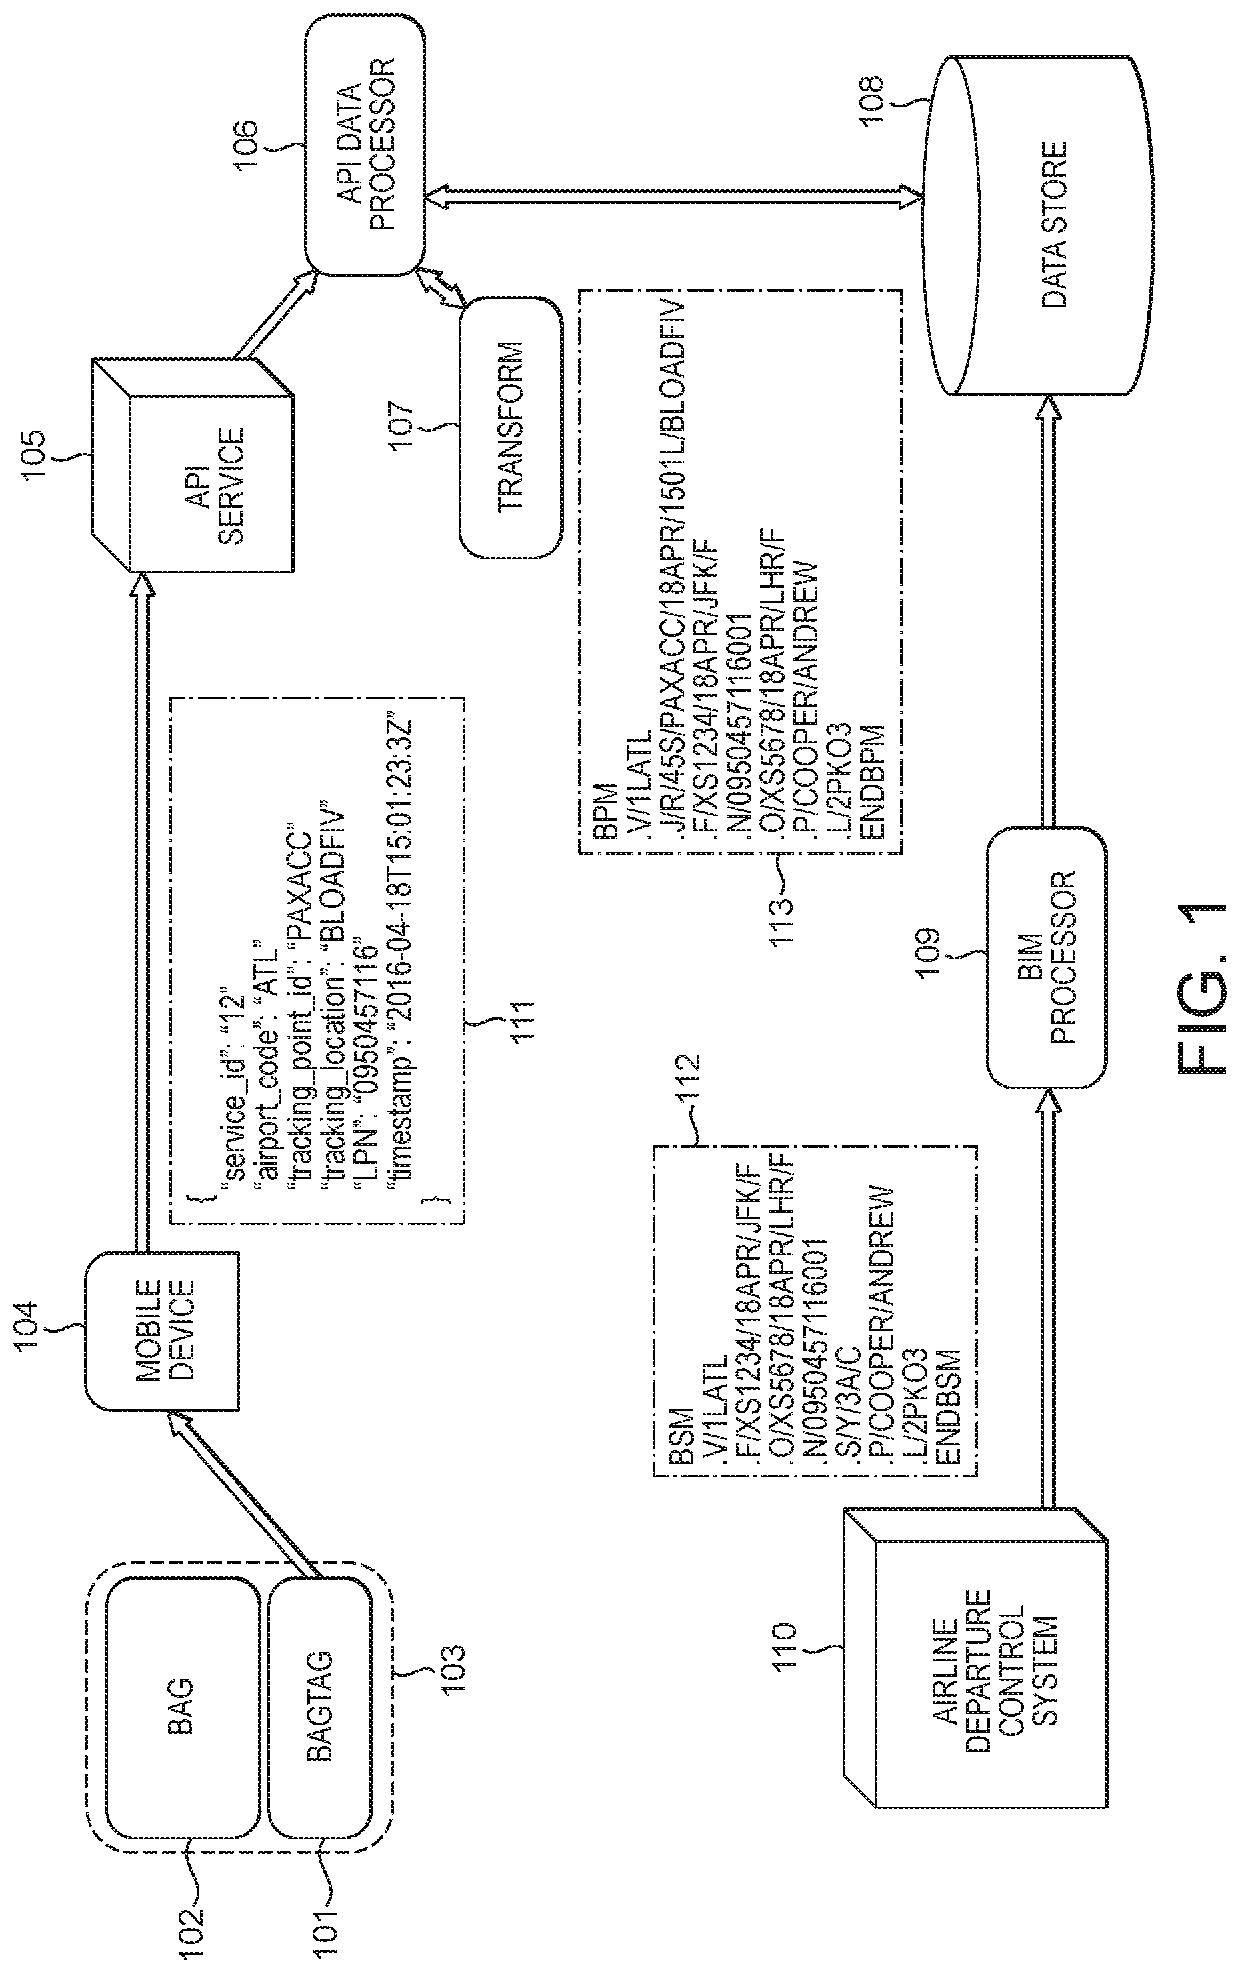 System and method for tracking baggage on cruise liners